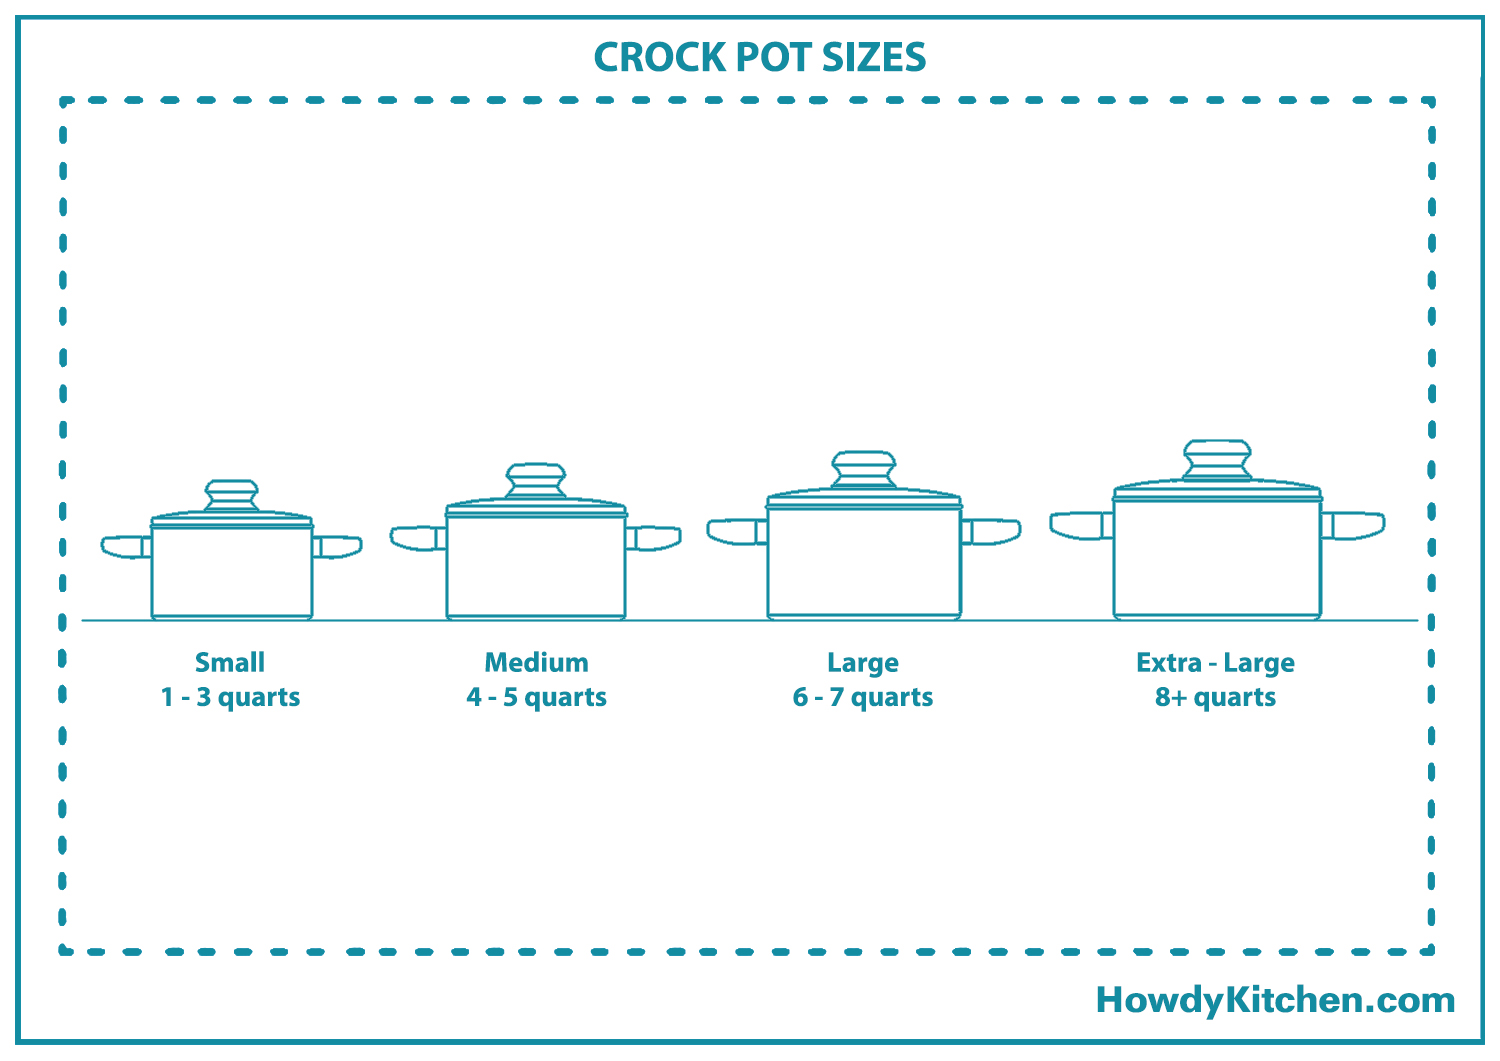 What Are the Crock Pot Sizes? - HowdyKitchen